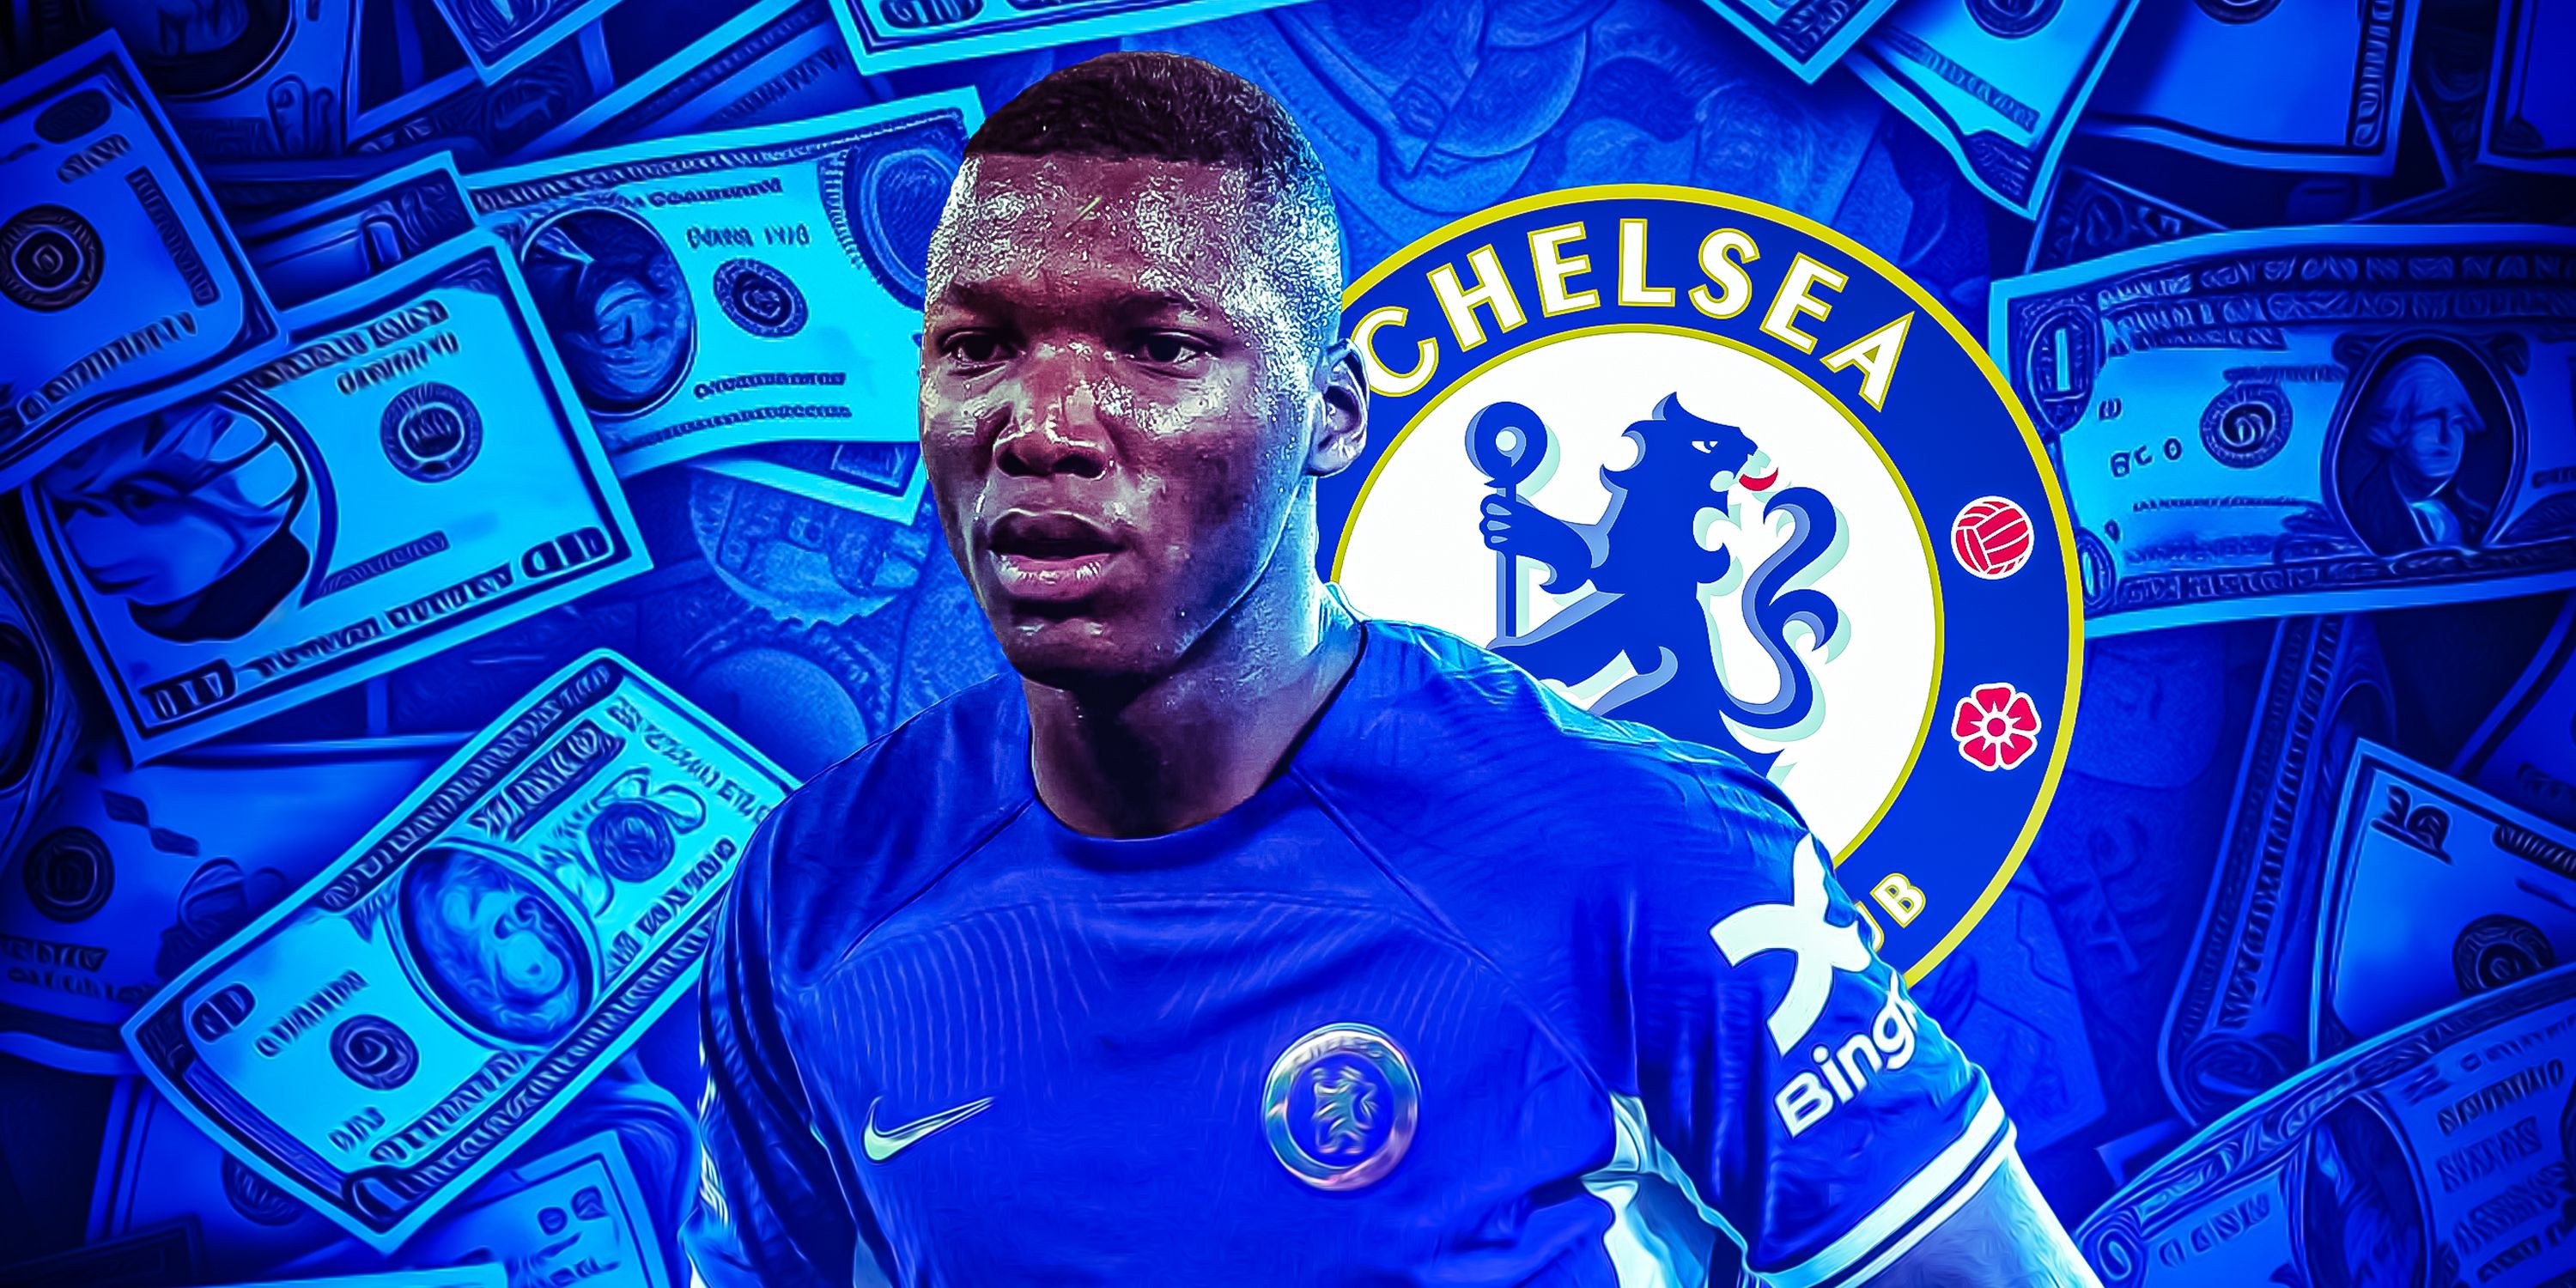 Moises Caicedo in front of the Chelsea and money background